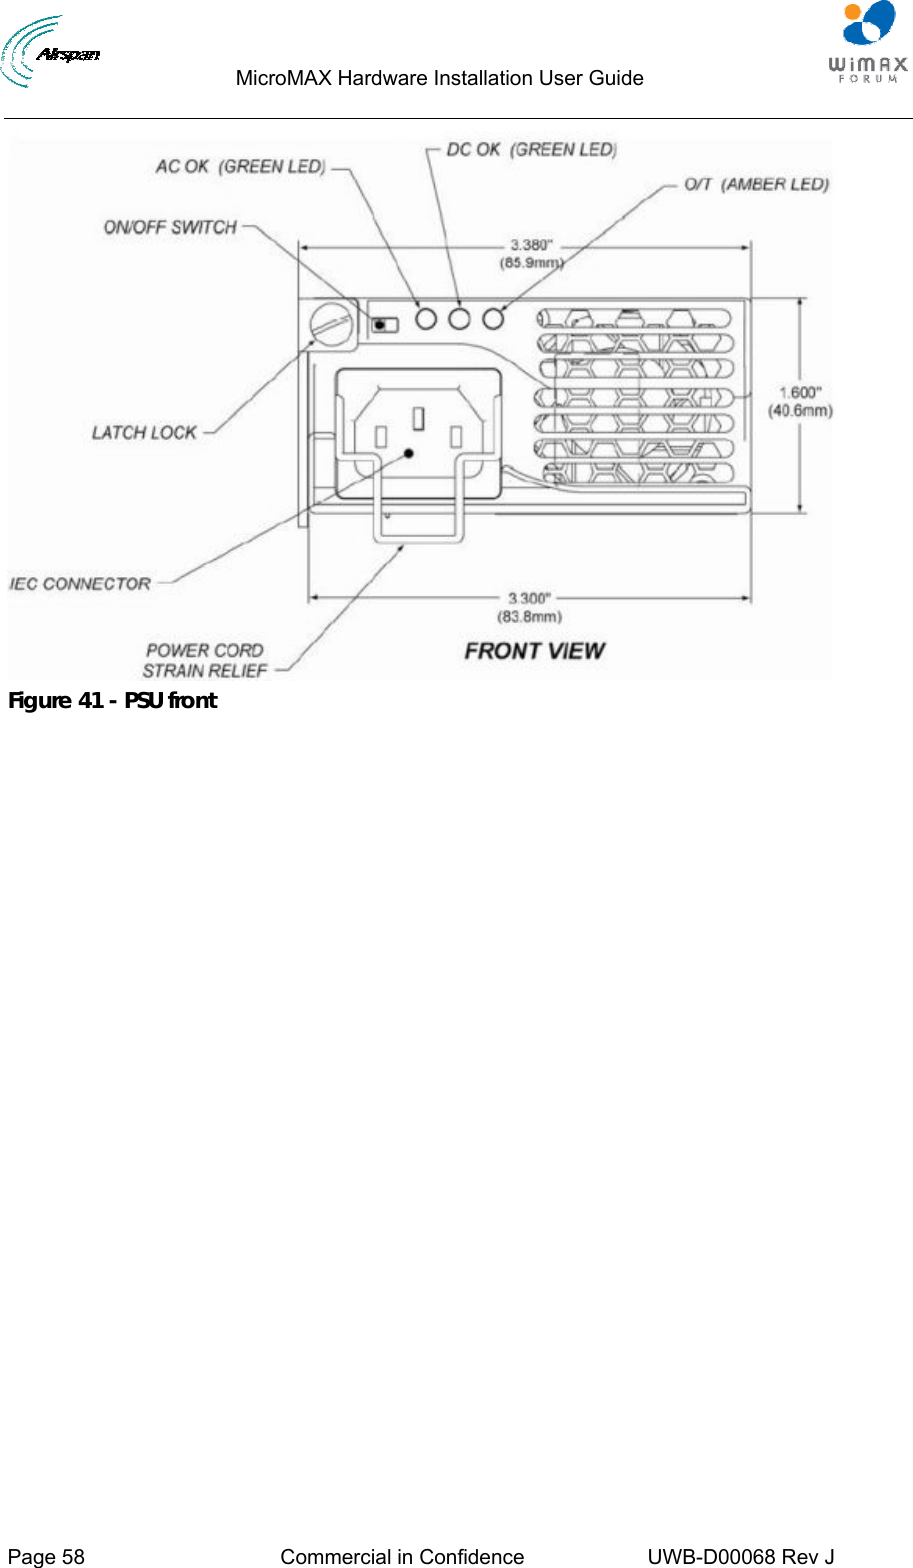                                  MicroMAX Hardware Installation User Guide     Page 58  Commercial in Confidence  UWB-D00068 Rev J    Figure 41 - PSU front 